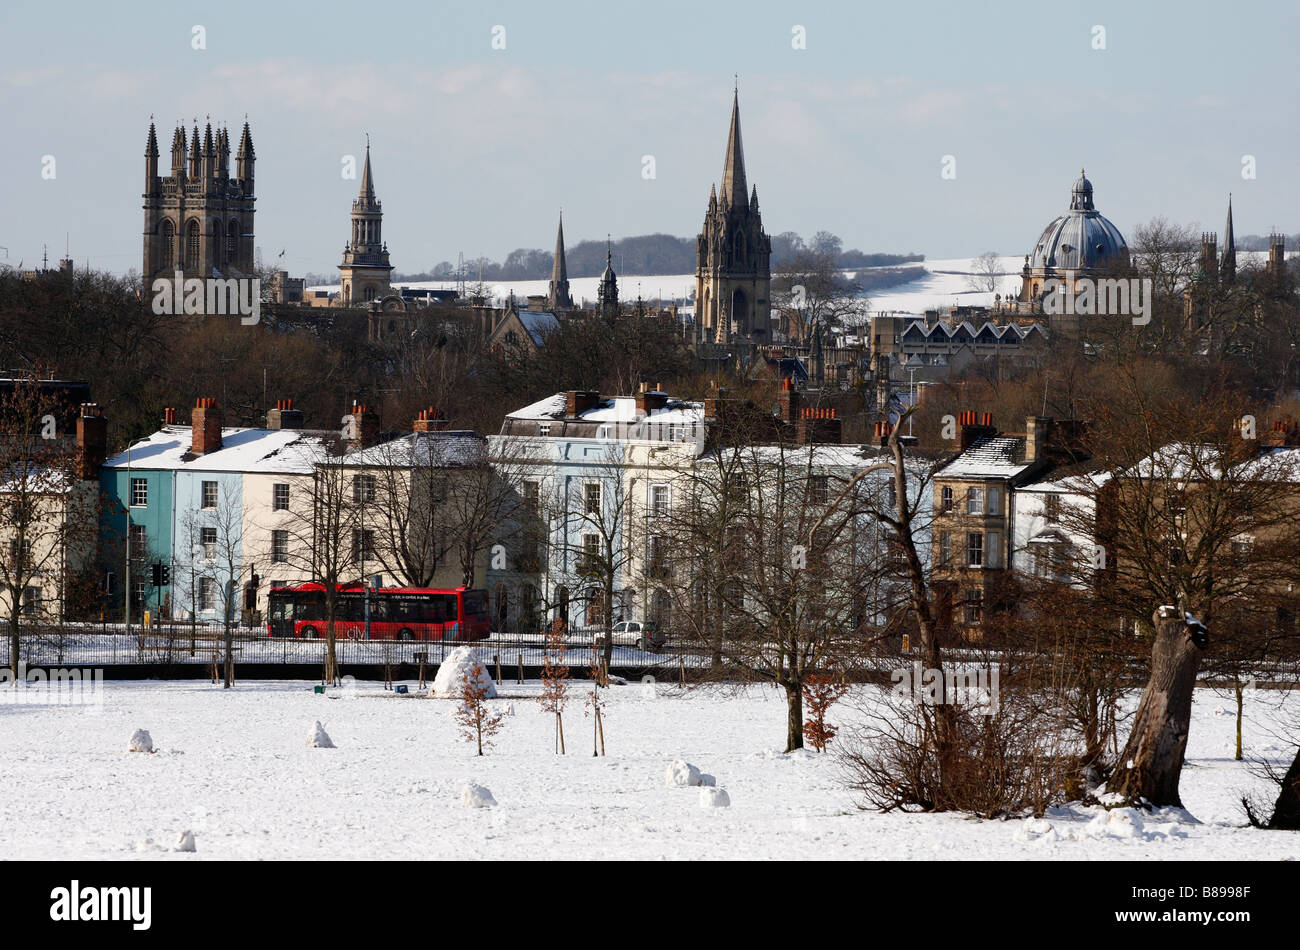 Oxford City of 'Dreaming Spires', view from 'South Park' covered in white snow, Oxfordshire, England, UK, Winter scene Stock Photo